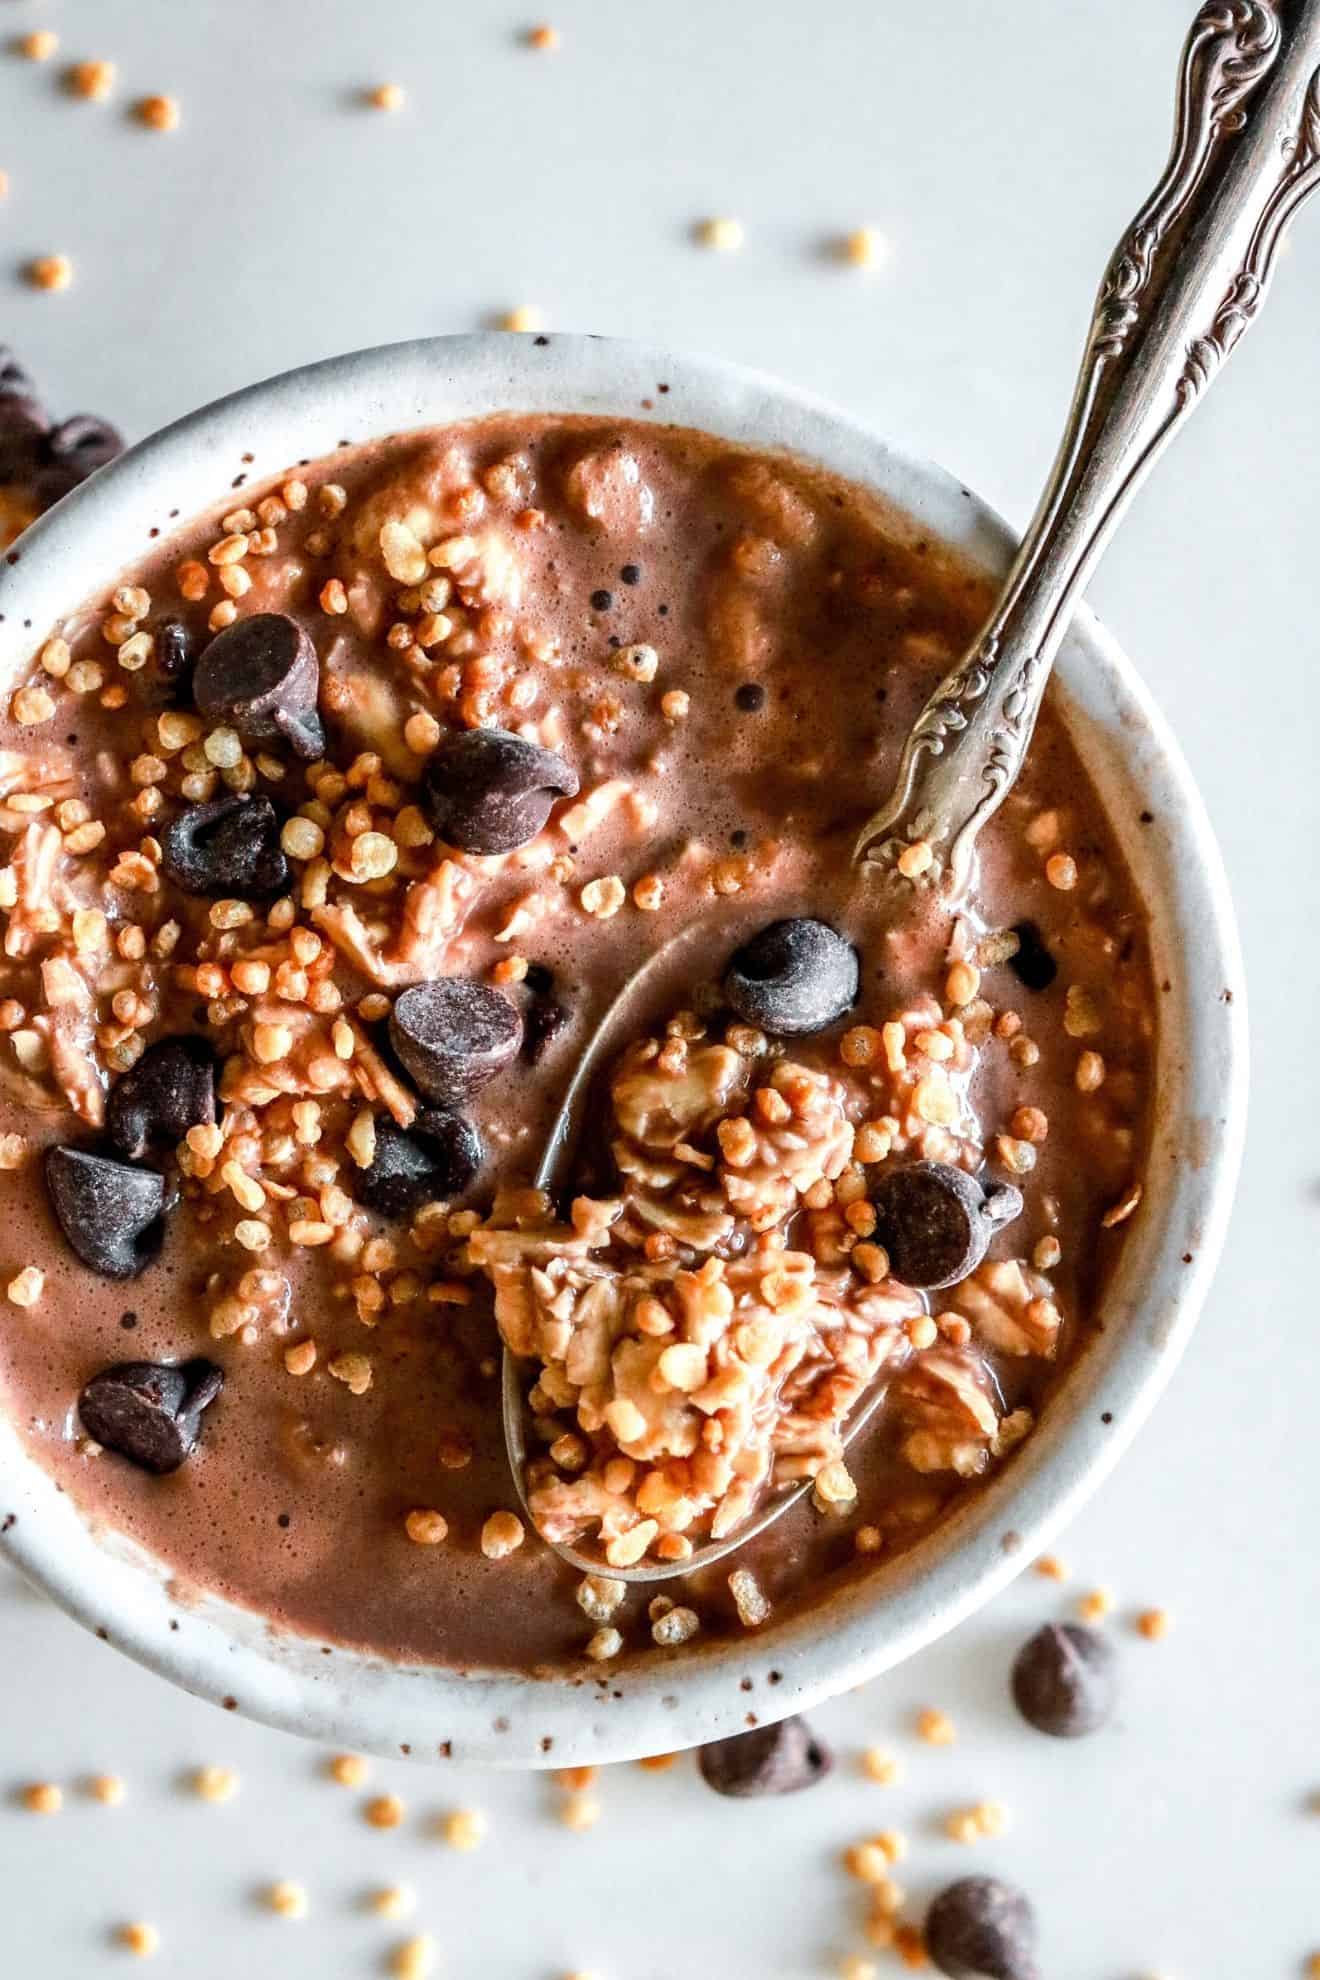 Chocolate Overnight Oats - The Toasted Pine Nut